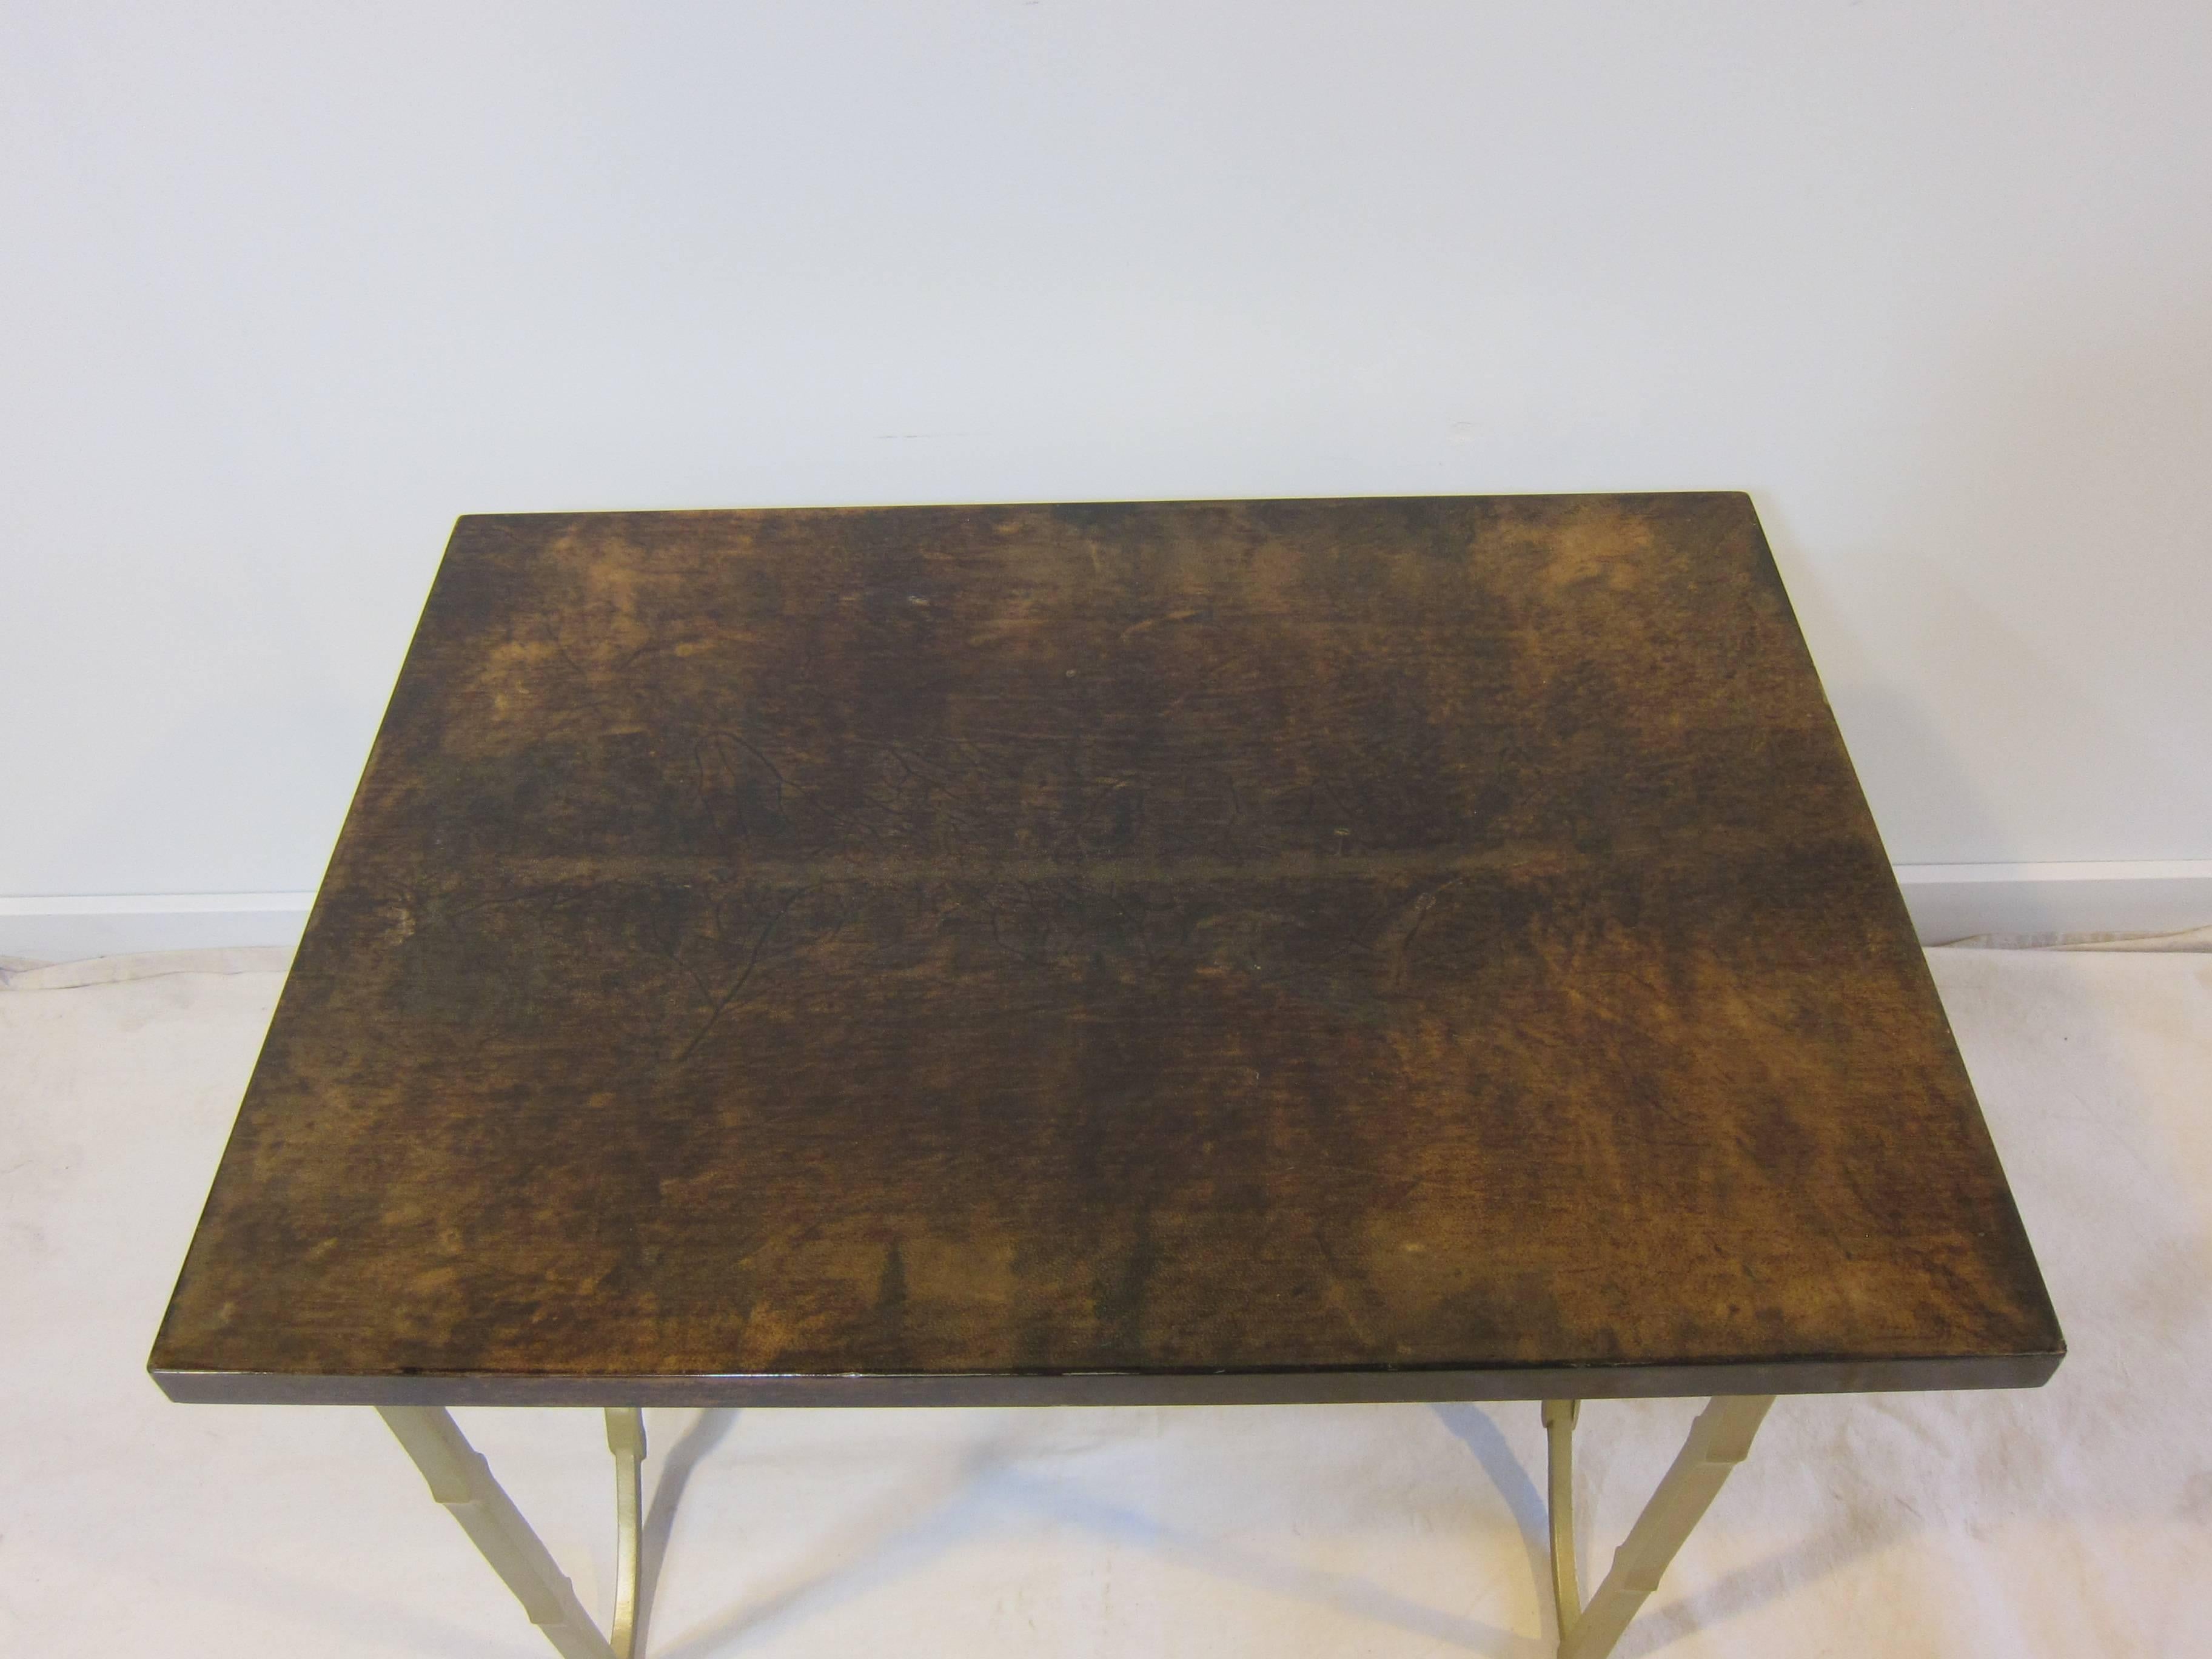 Aldo Tura goatskin lacquered side or end table with decorative metal base. 
The Aldo Tura label to underside. Good condition with some scratches and nicks to the top. Wear consistent with age and use.